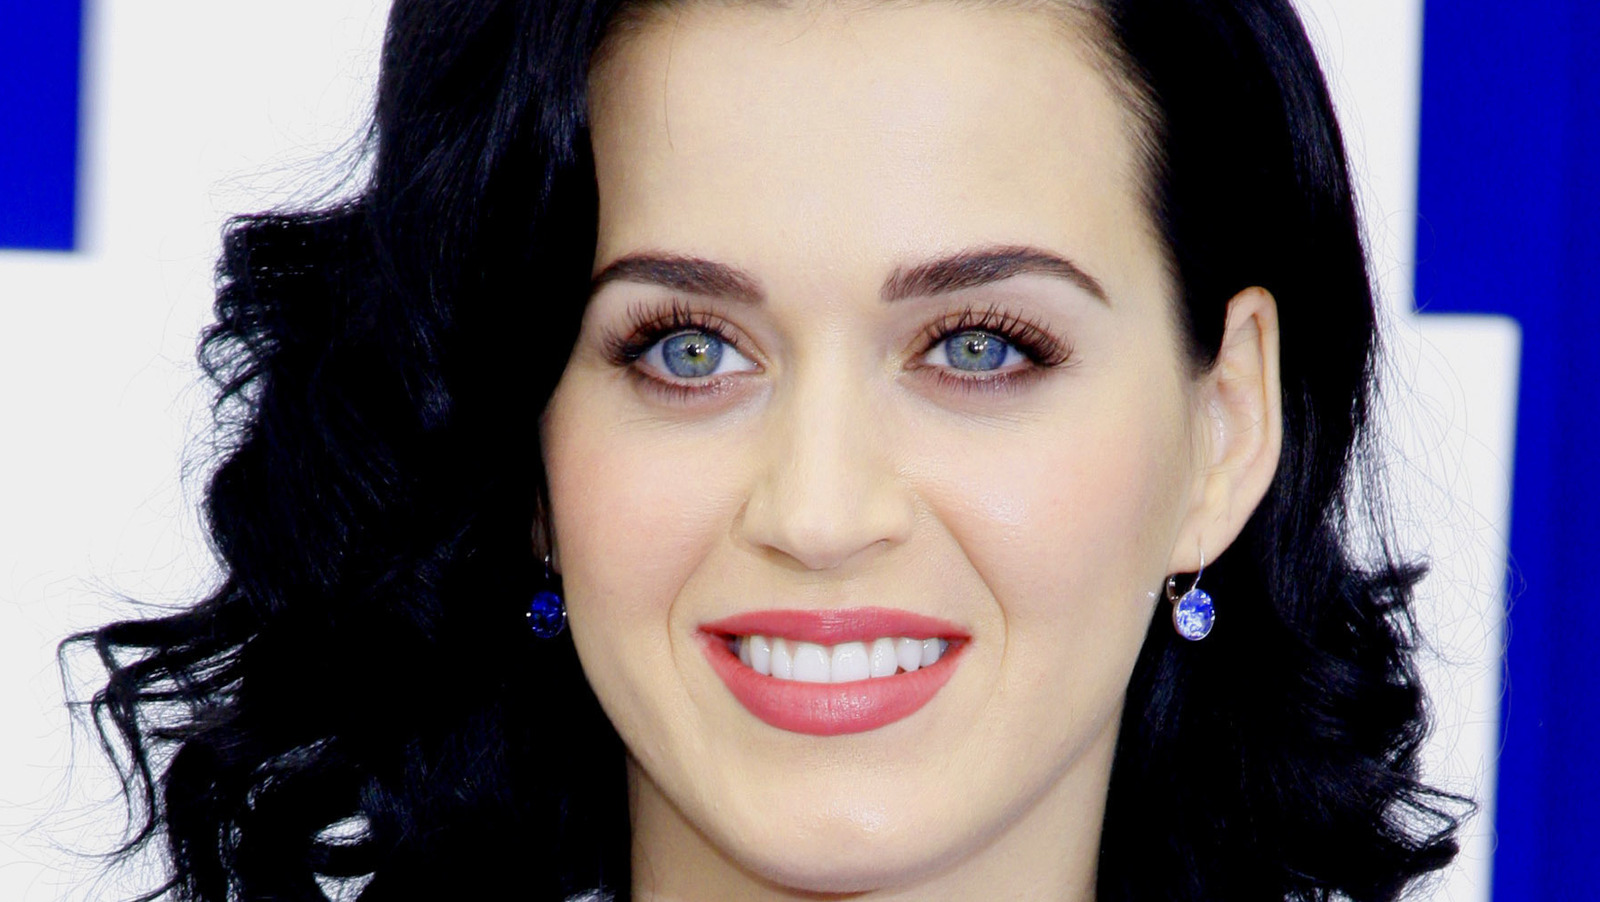 Katy Perry Is The Queen Of Camp And Kitsch. Here's How To Dress Like Her